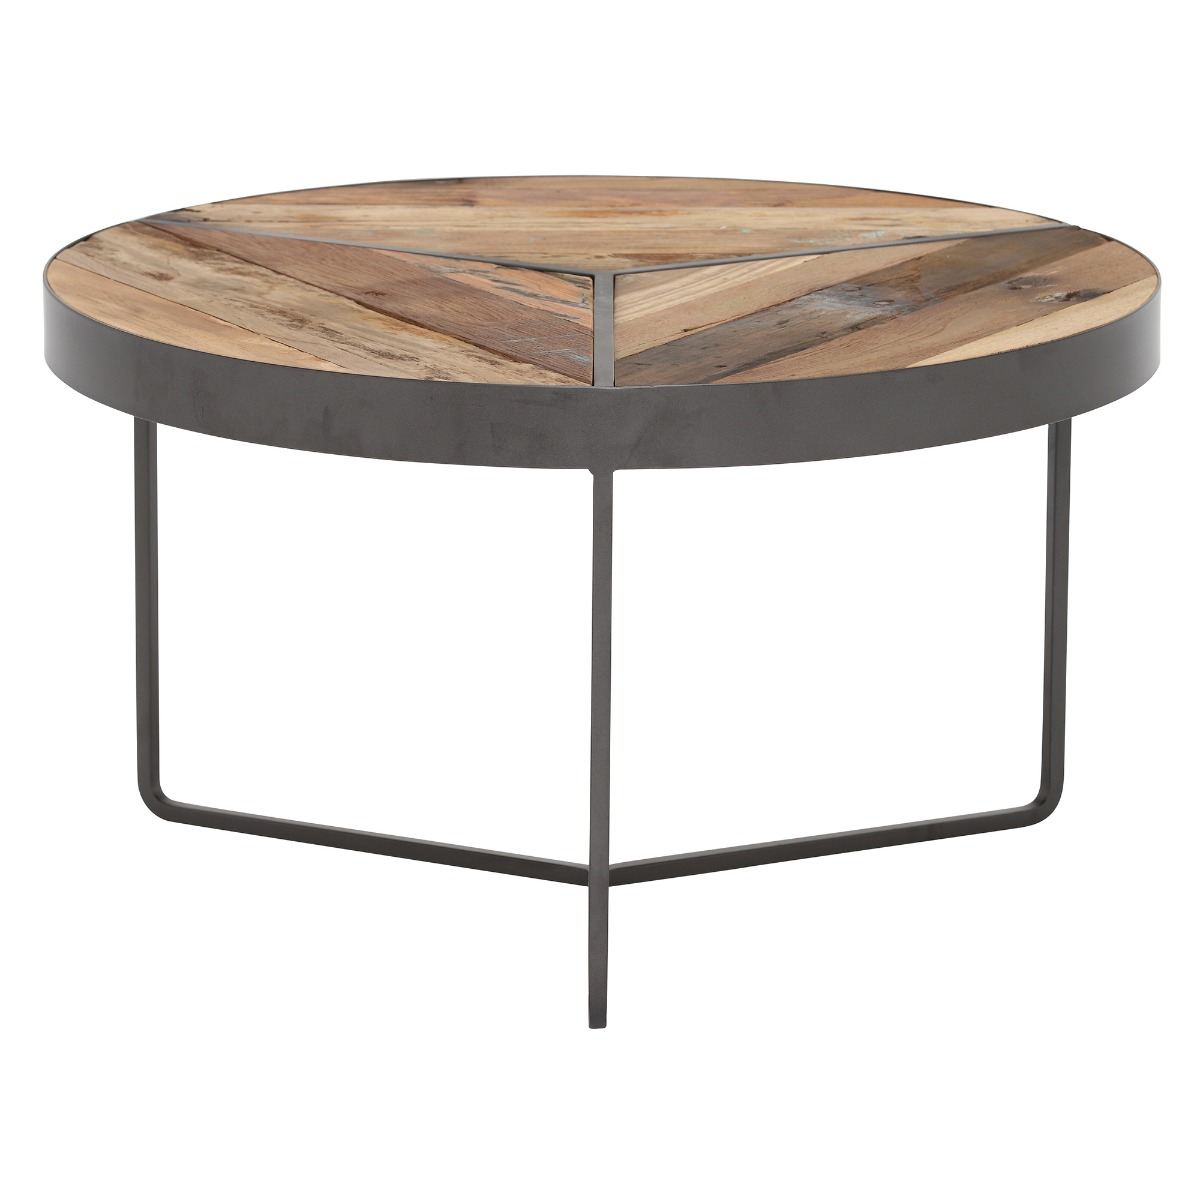 Taiga Small Round Rustic Coffee Table, Brown | Barker & Stonehouse